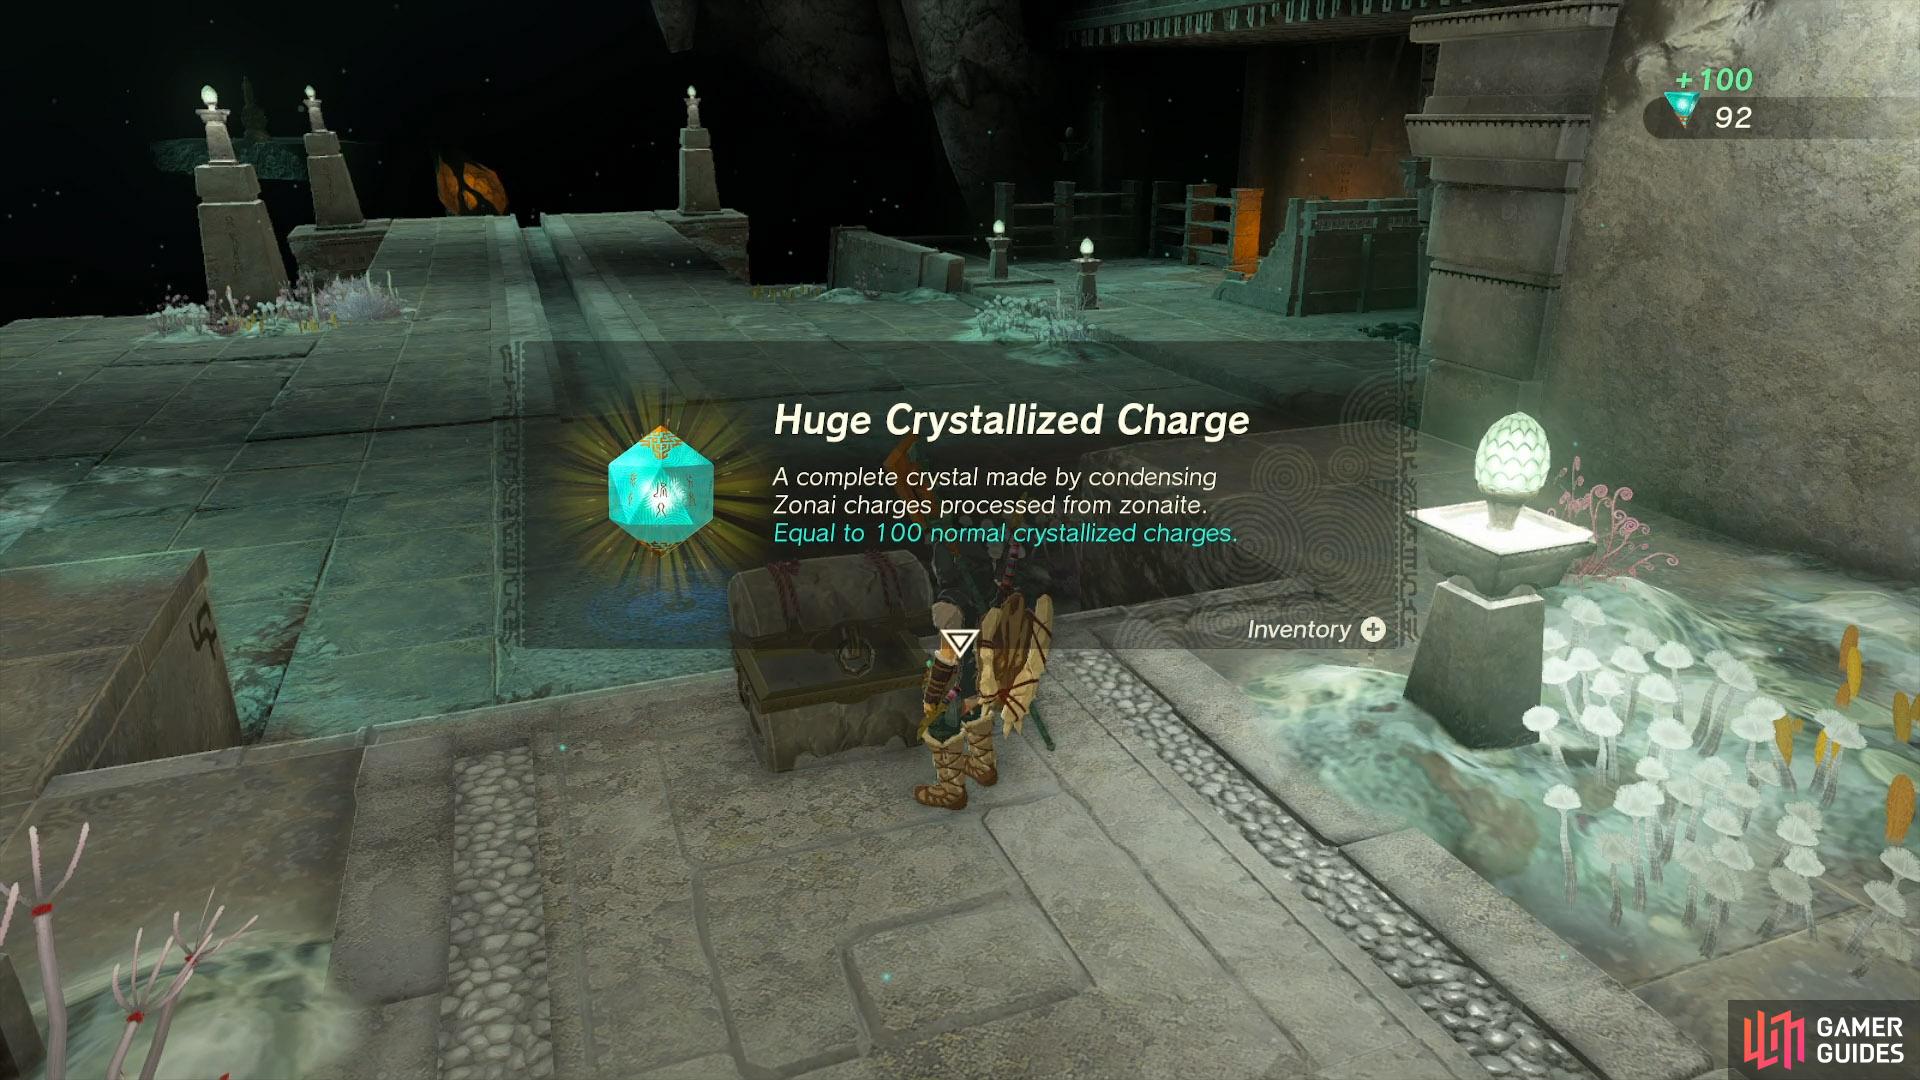 The Huge Crystallized Charge reward for beating Master Kohga